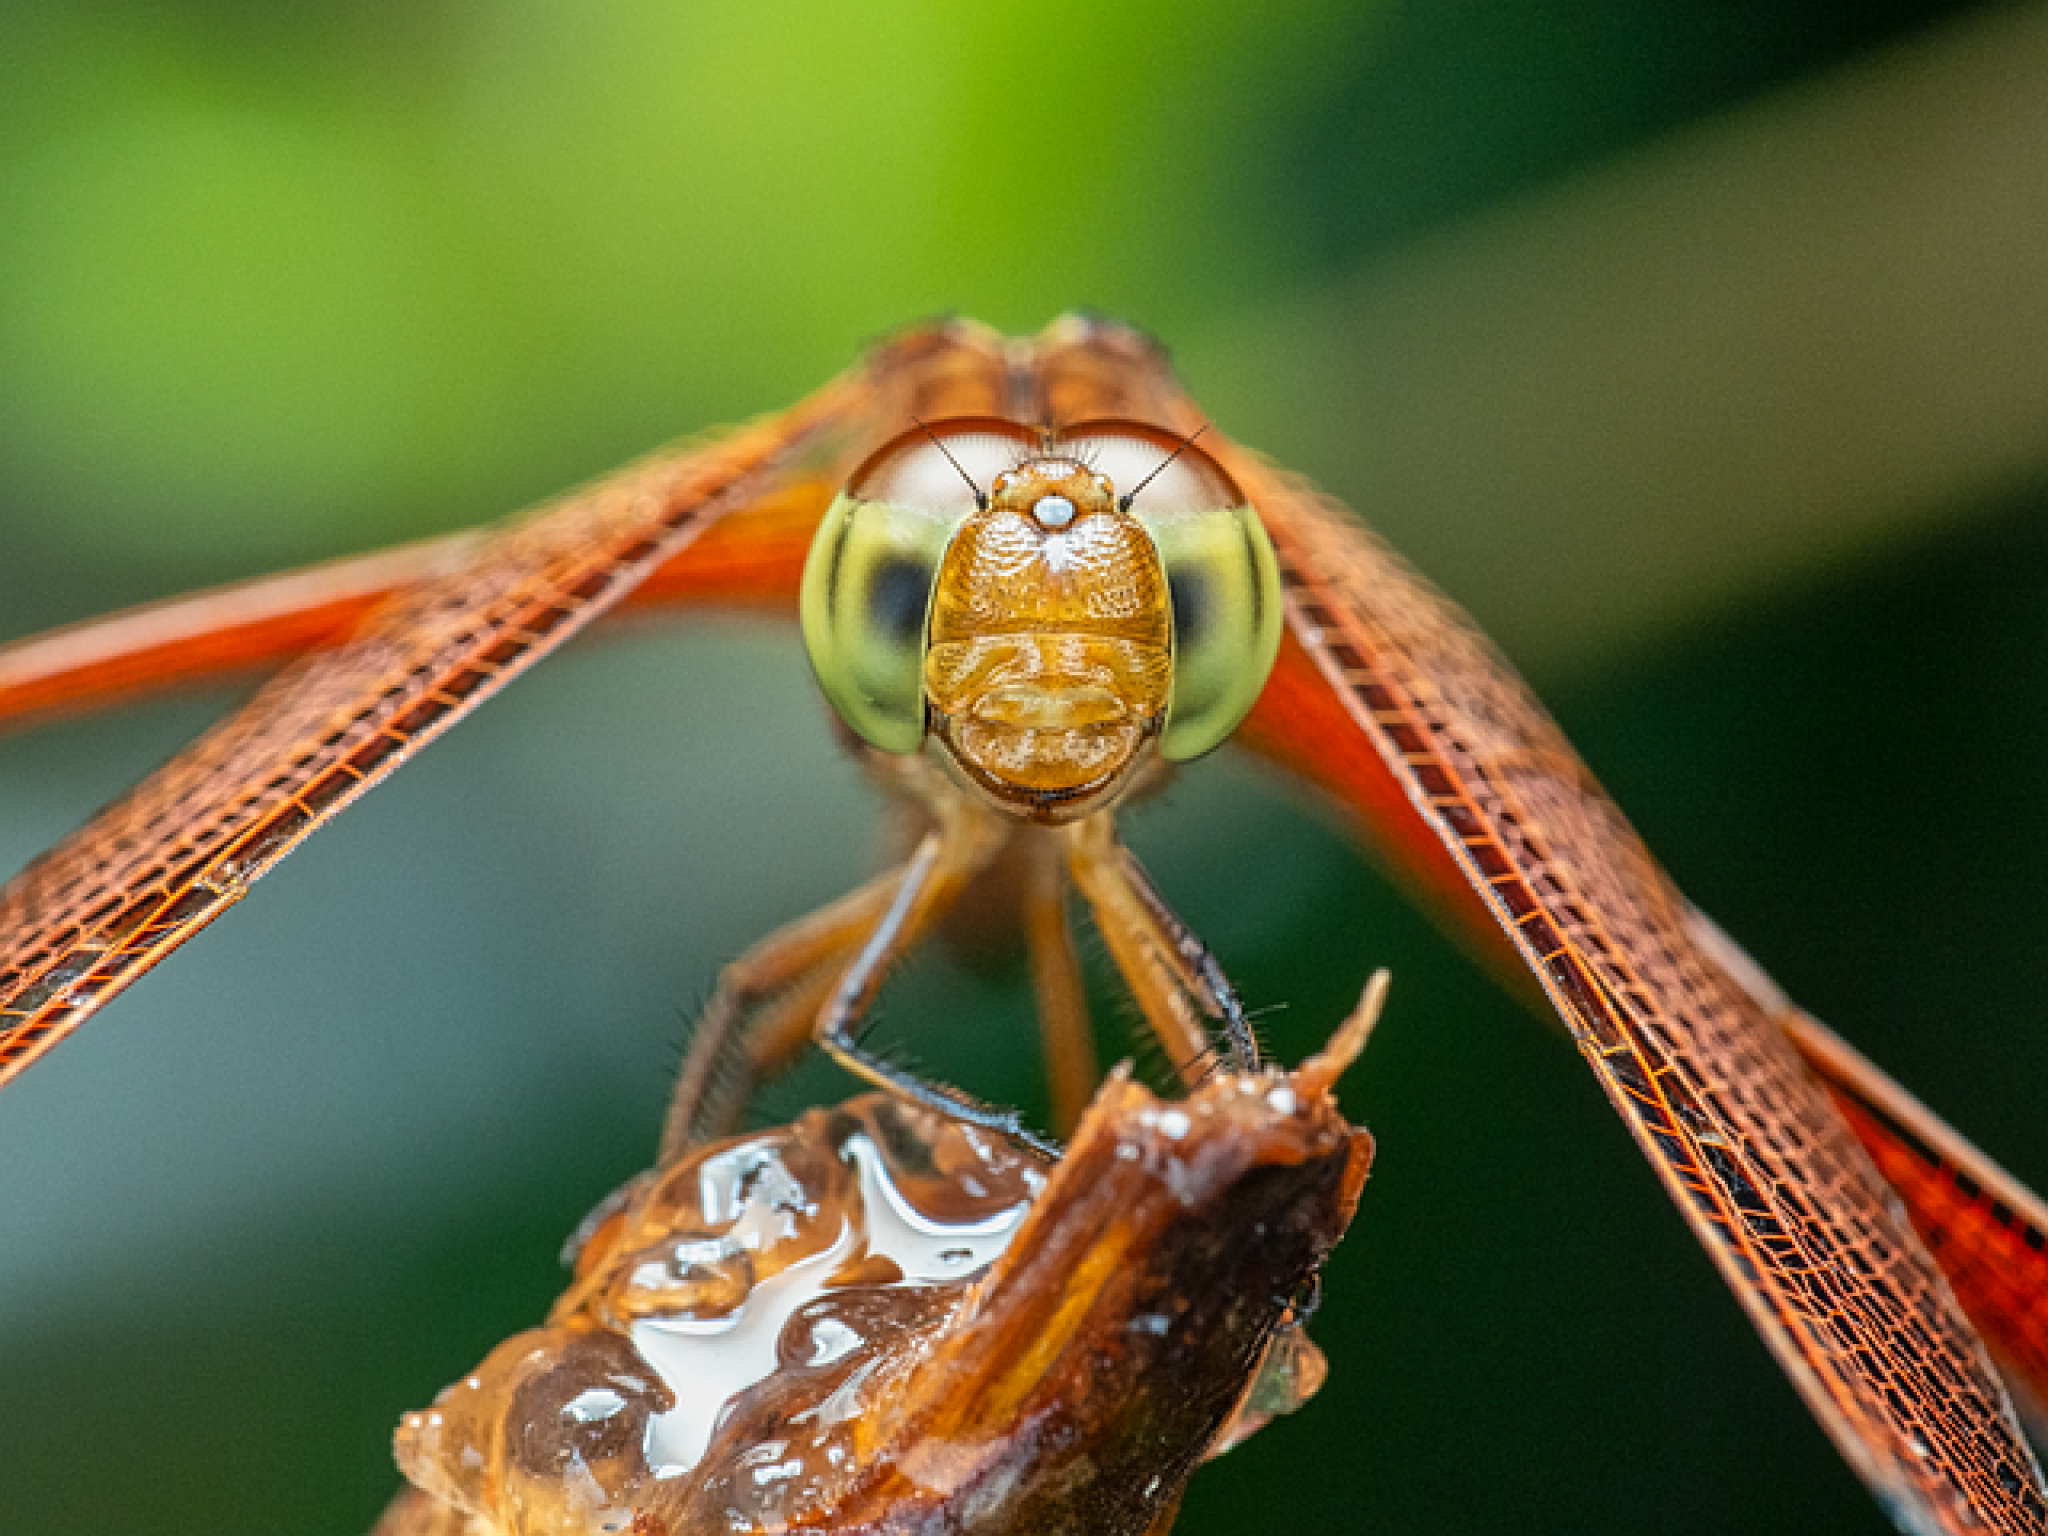 Image of dragonfly by jonleong64 from https://pixabay.com/photos/dragonfly-wings-eyes-closeup-twig-8272351/, free to use under https://pixabay.com/service/license-summary/ 